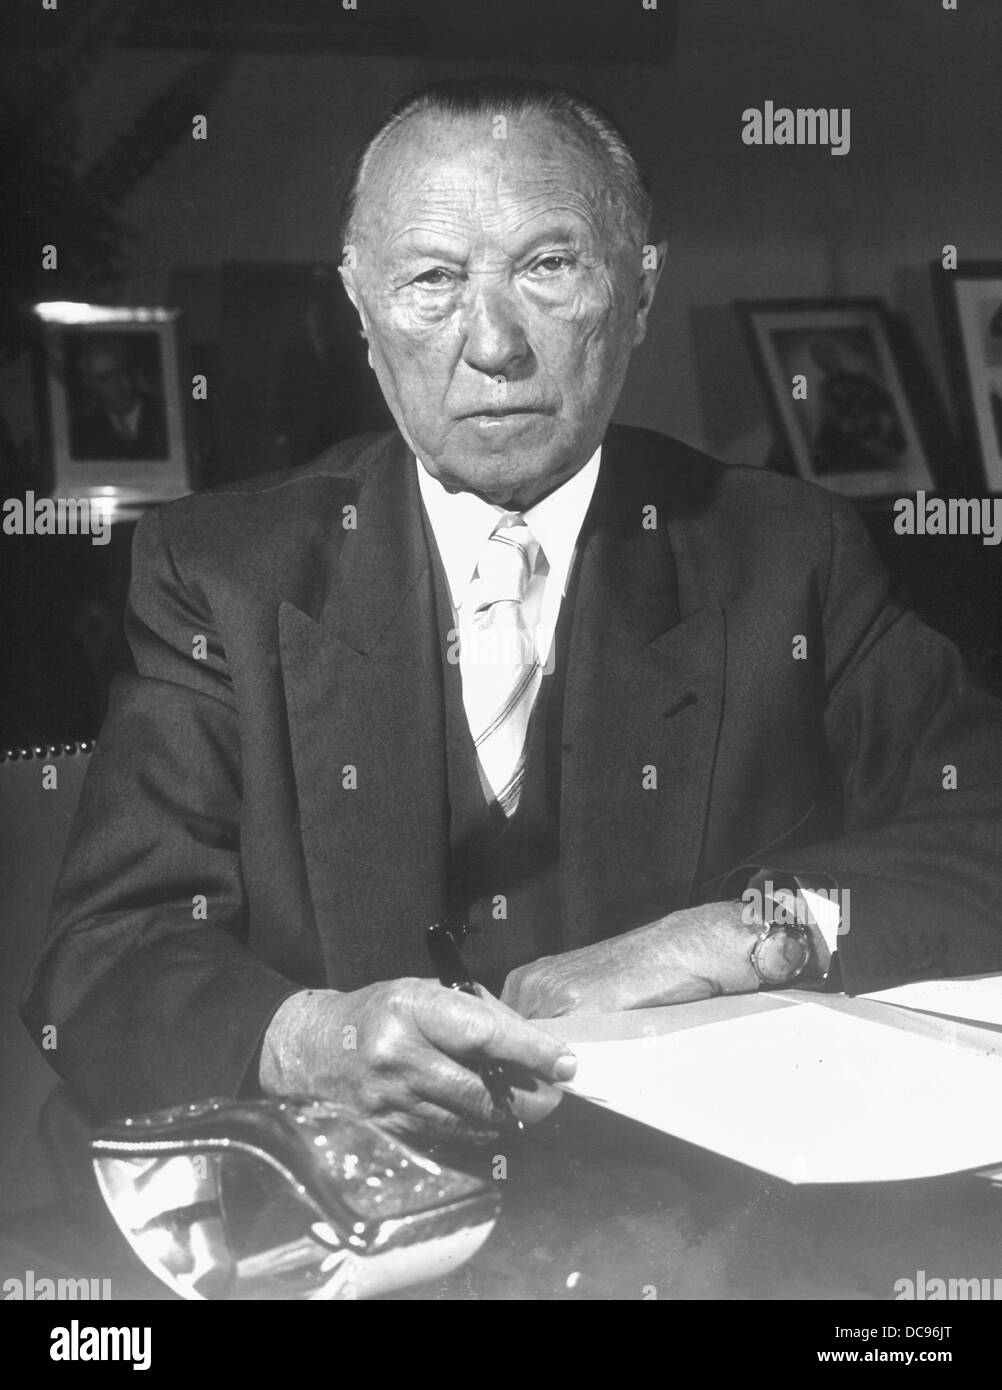 German chancellor Konrad Adenauer, photographed in May 1961 in his office in Bonn. He became the first chancellor of the Federal Republic of Germany on the 15th of September in 1949. Stock Photo